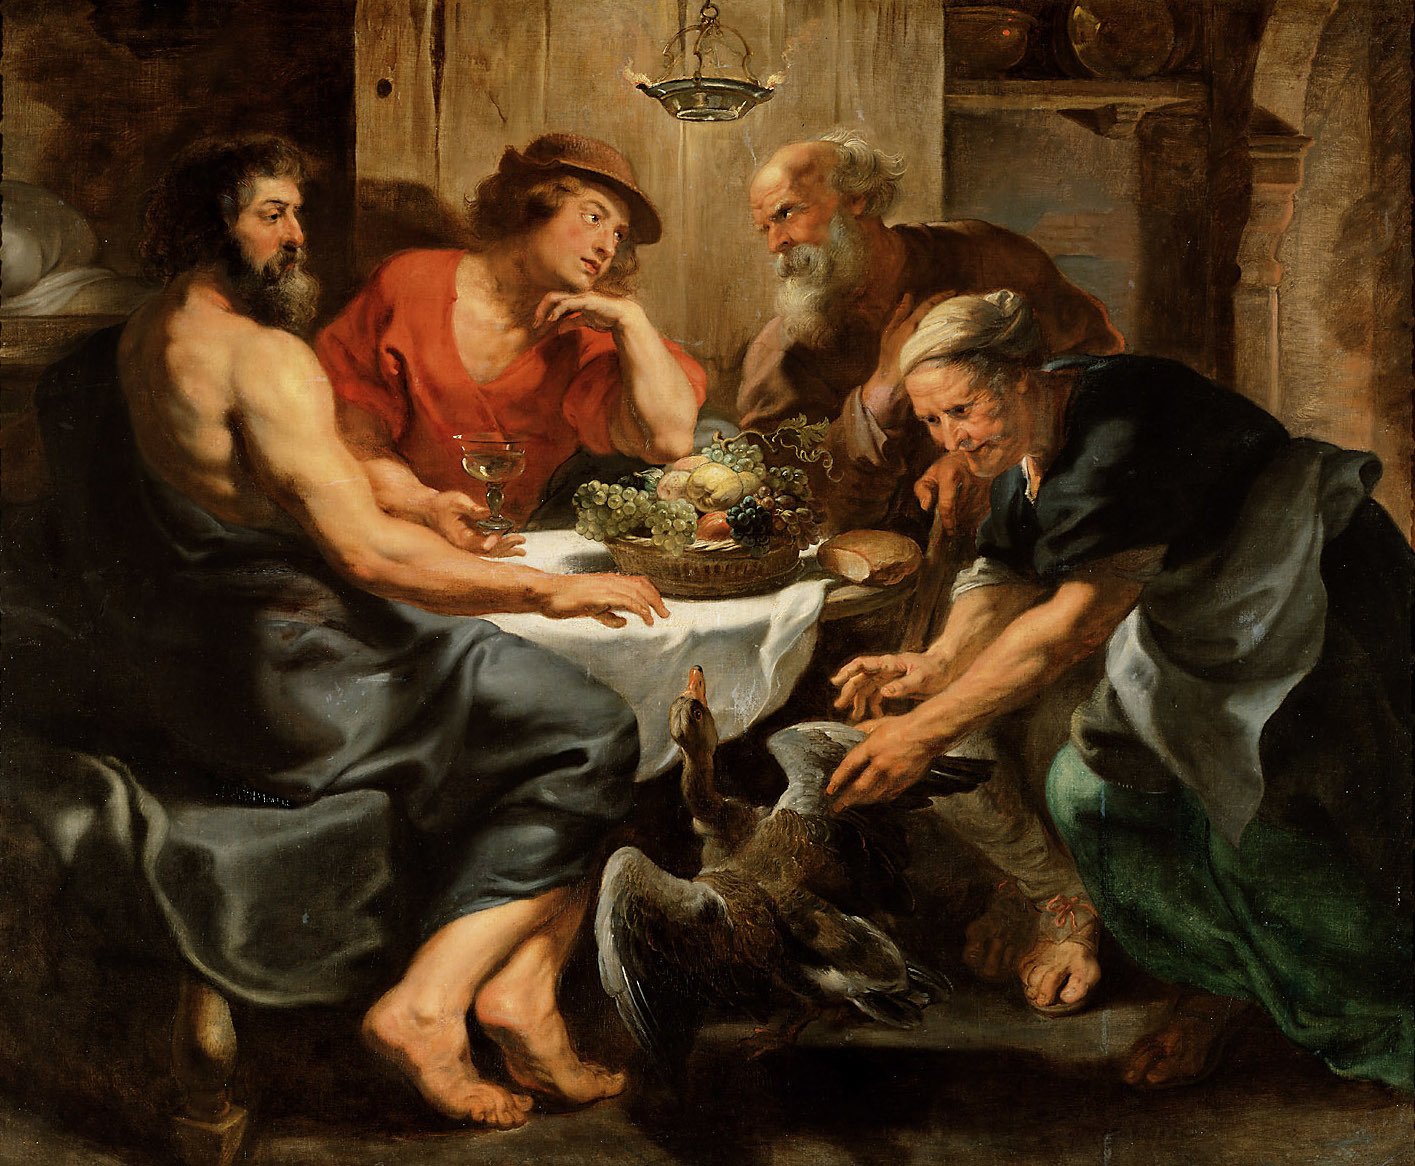 This painting represents Hermes and Zeus as guests in the house of two kind old persons.